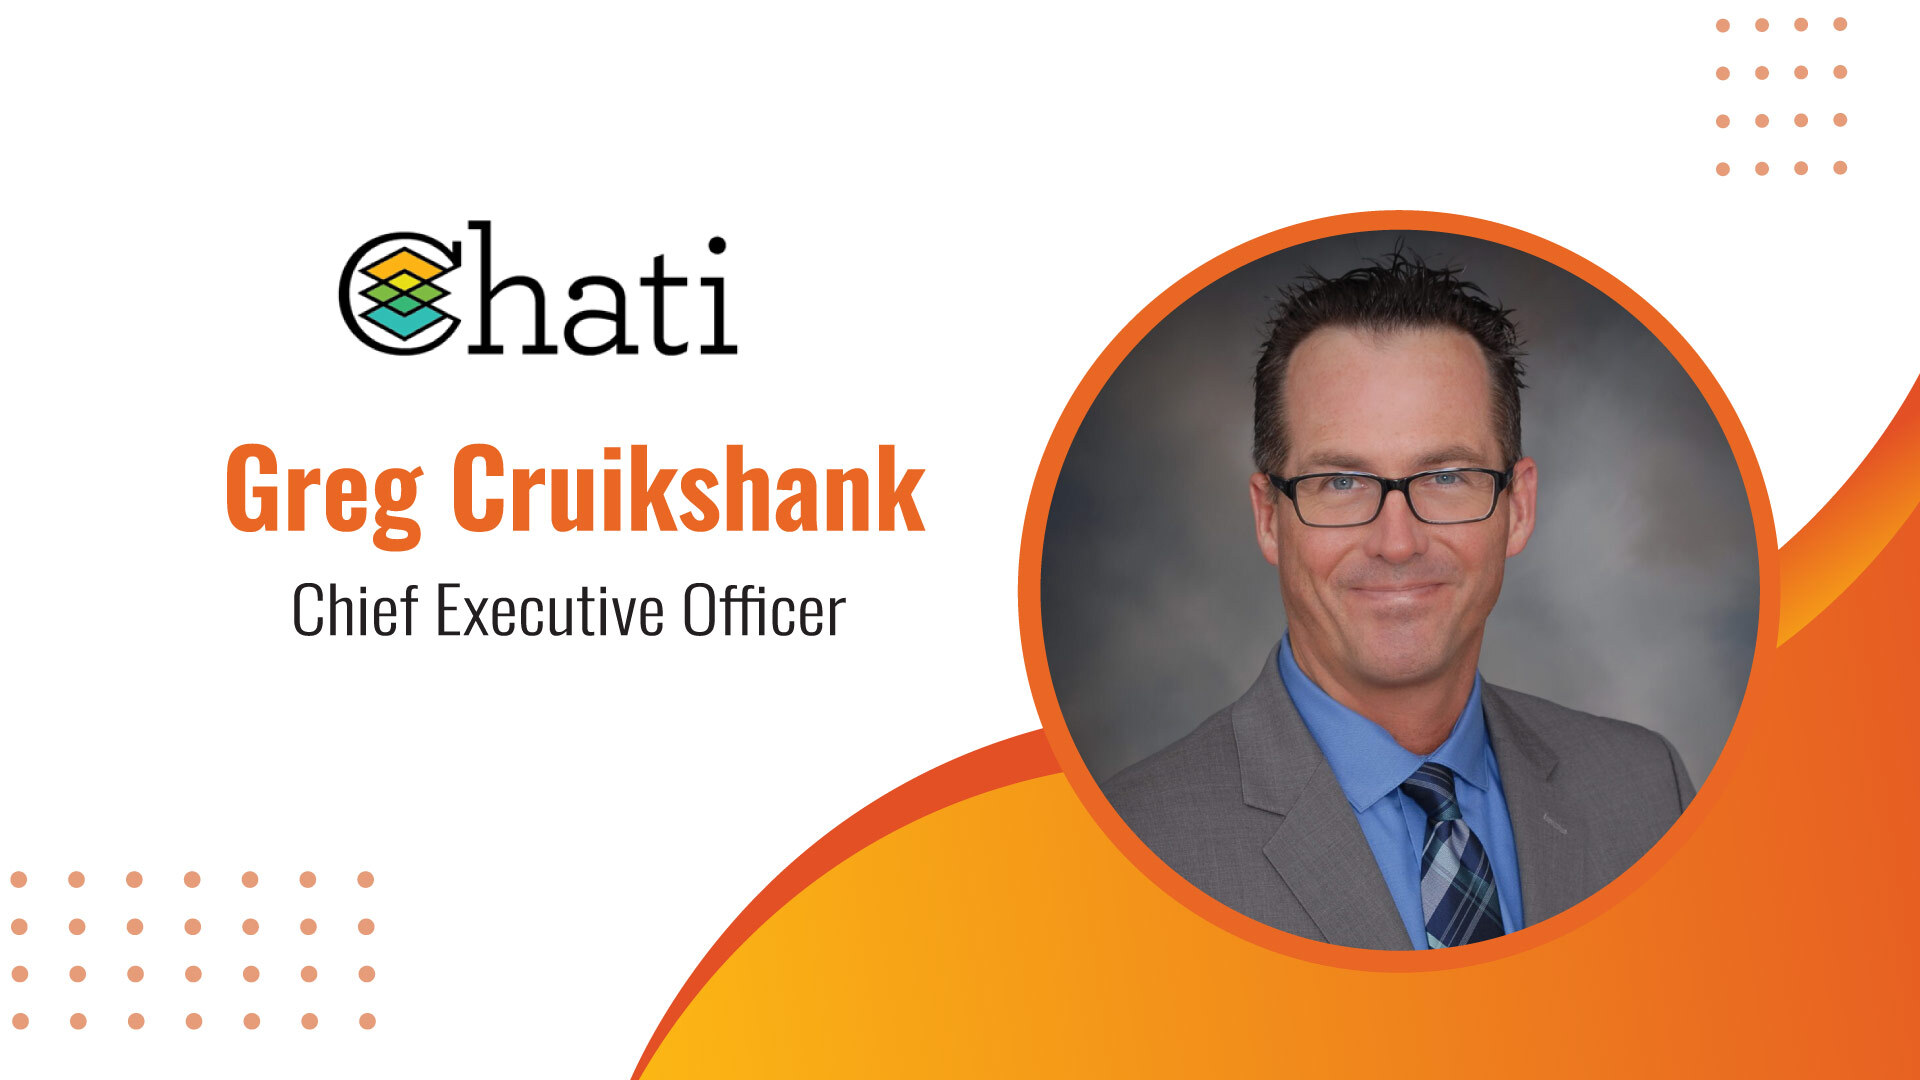 MarTech Edge Interview with Greg Cruikshank, Chief Executive Officer, Chati